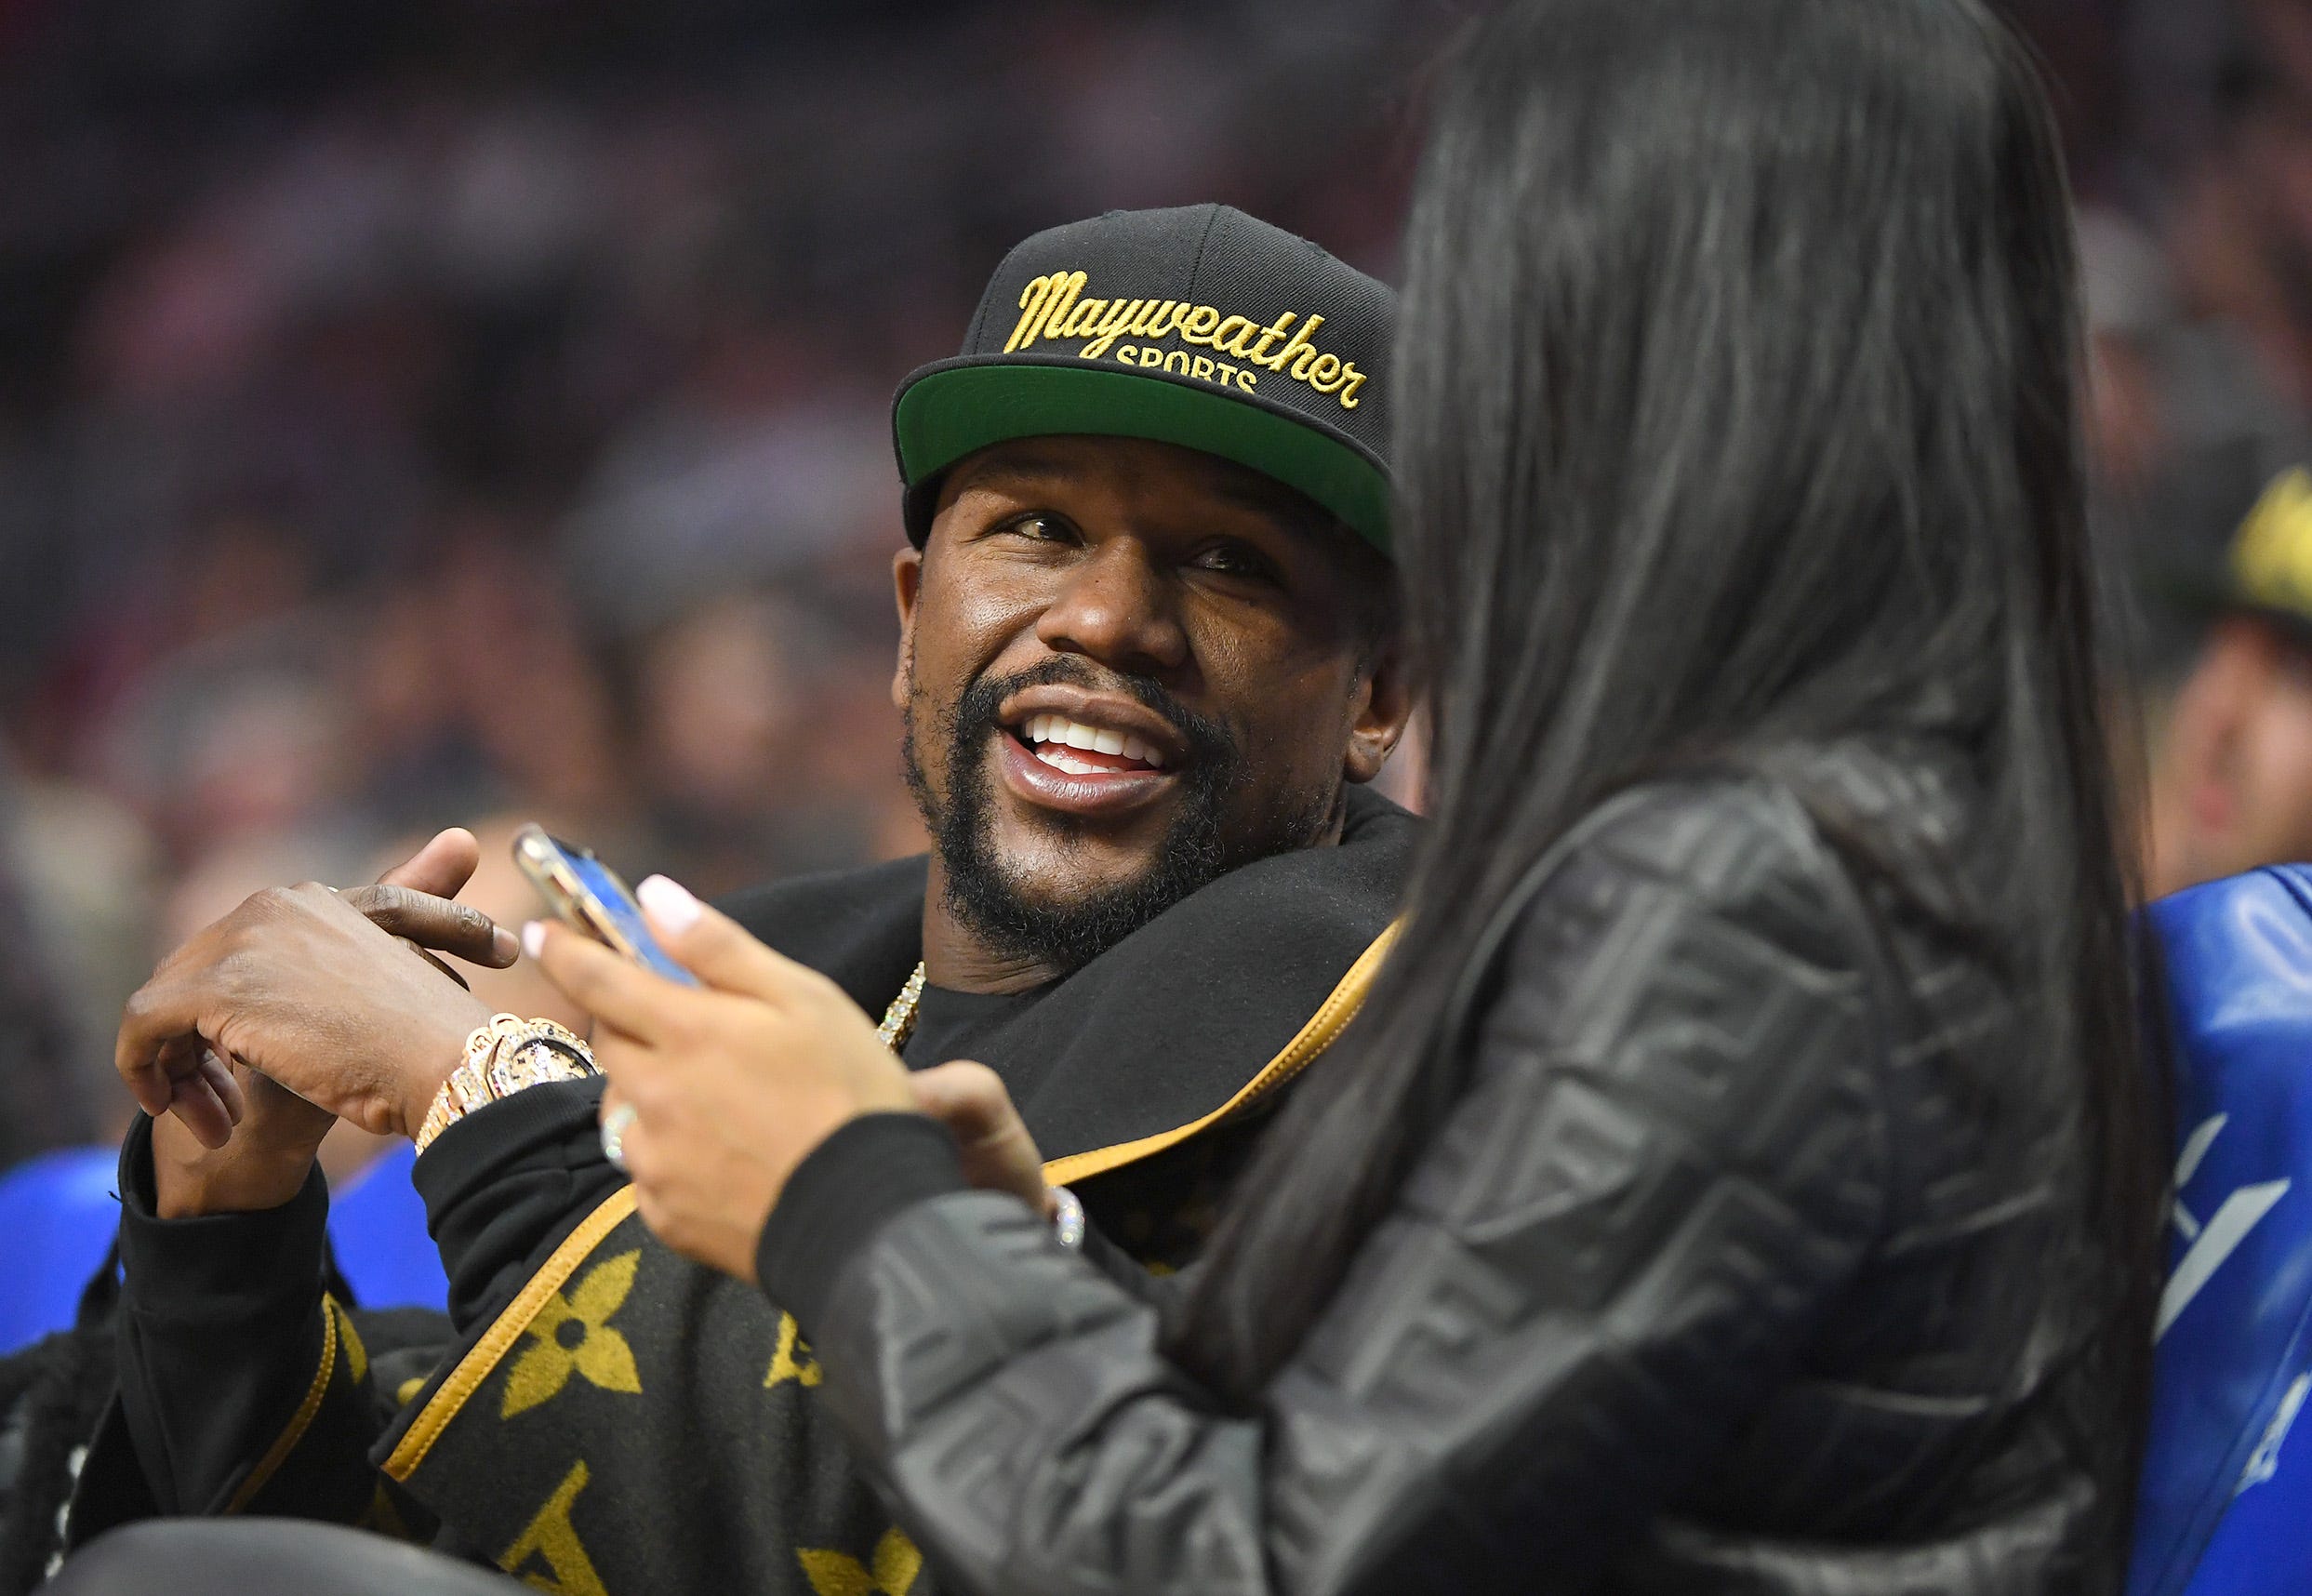 Floyd Mayweather says he's 'coming out of retirement' in Instagram post